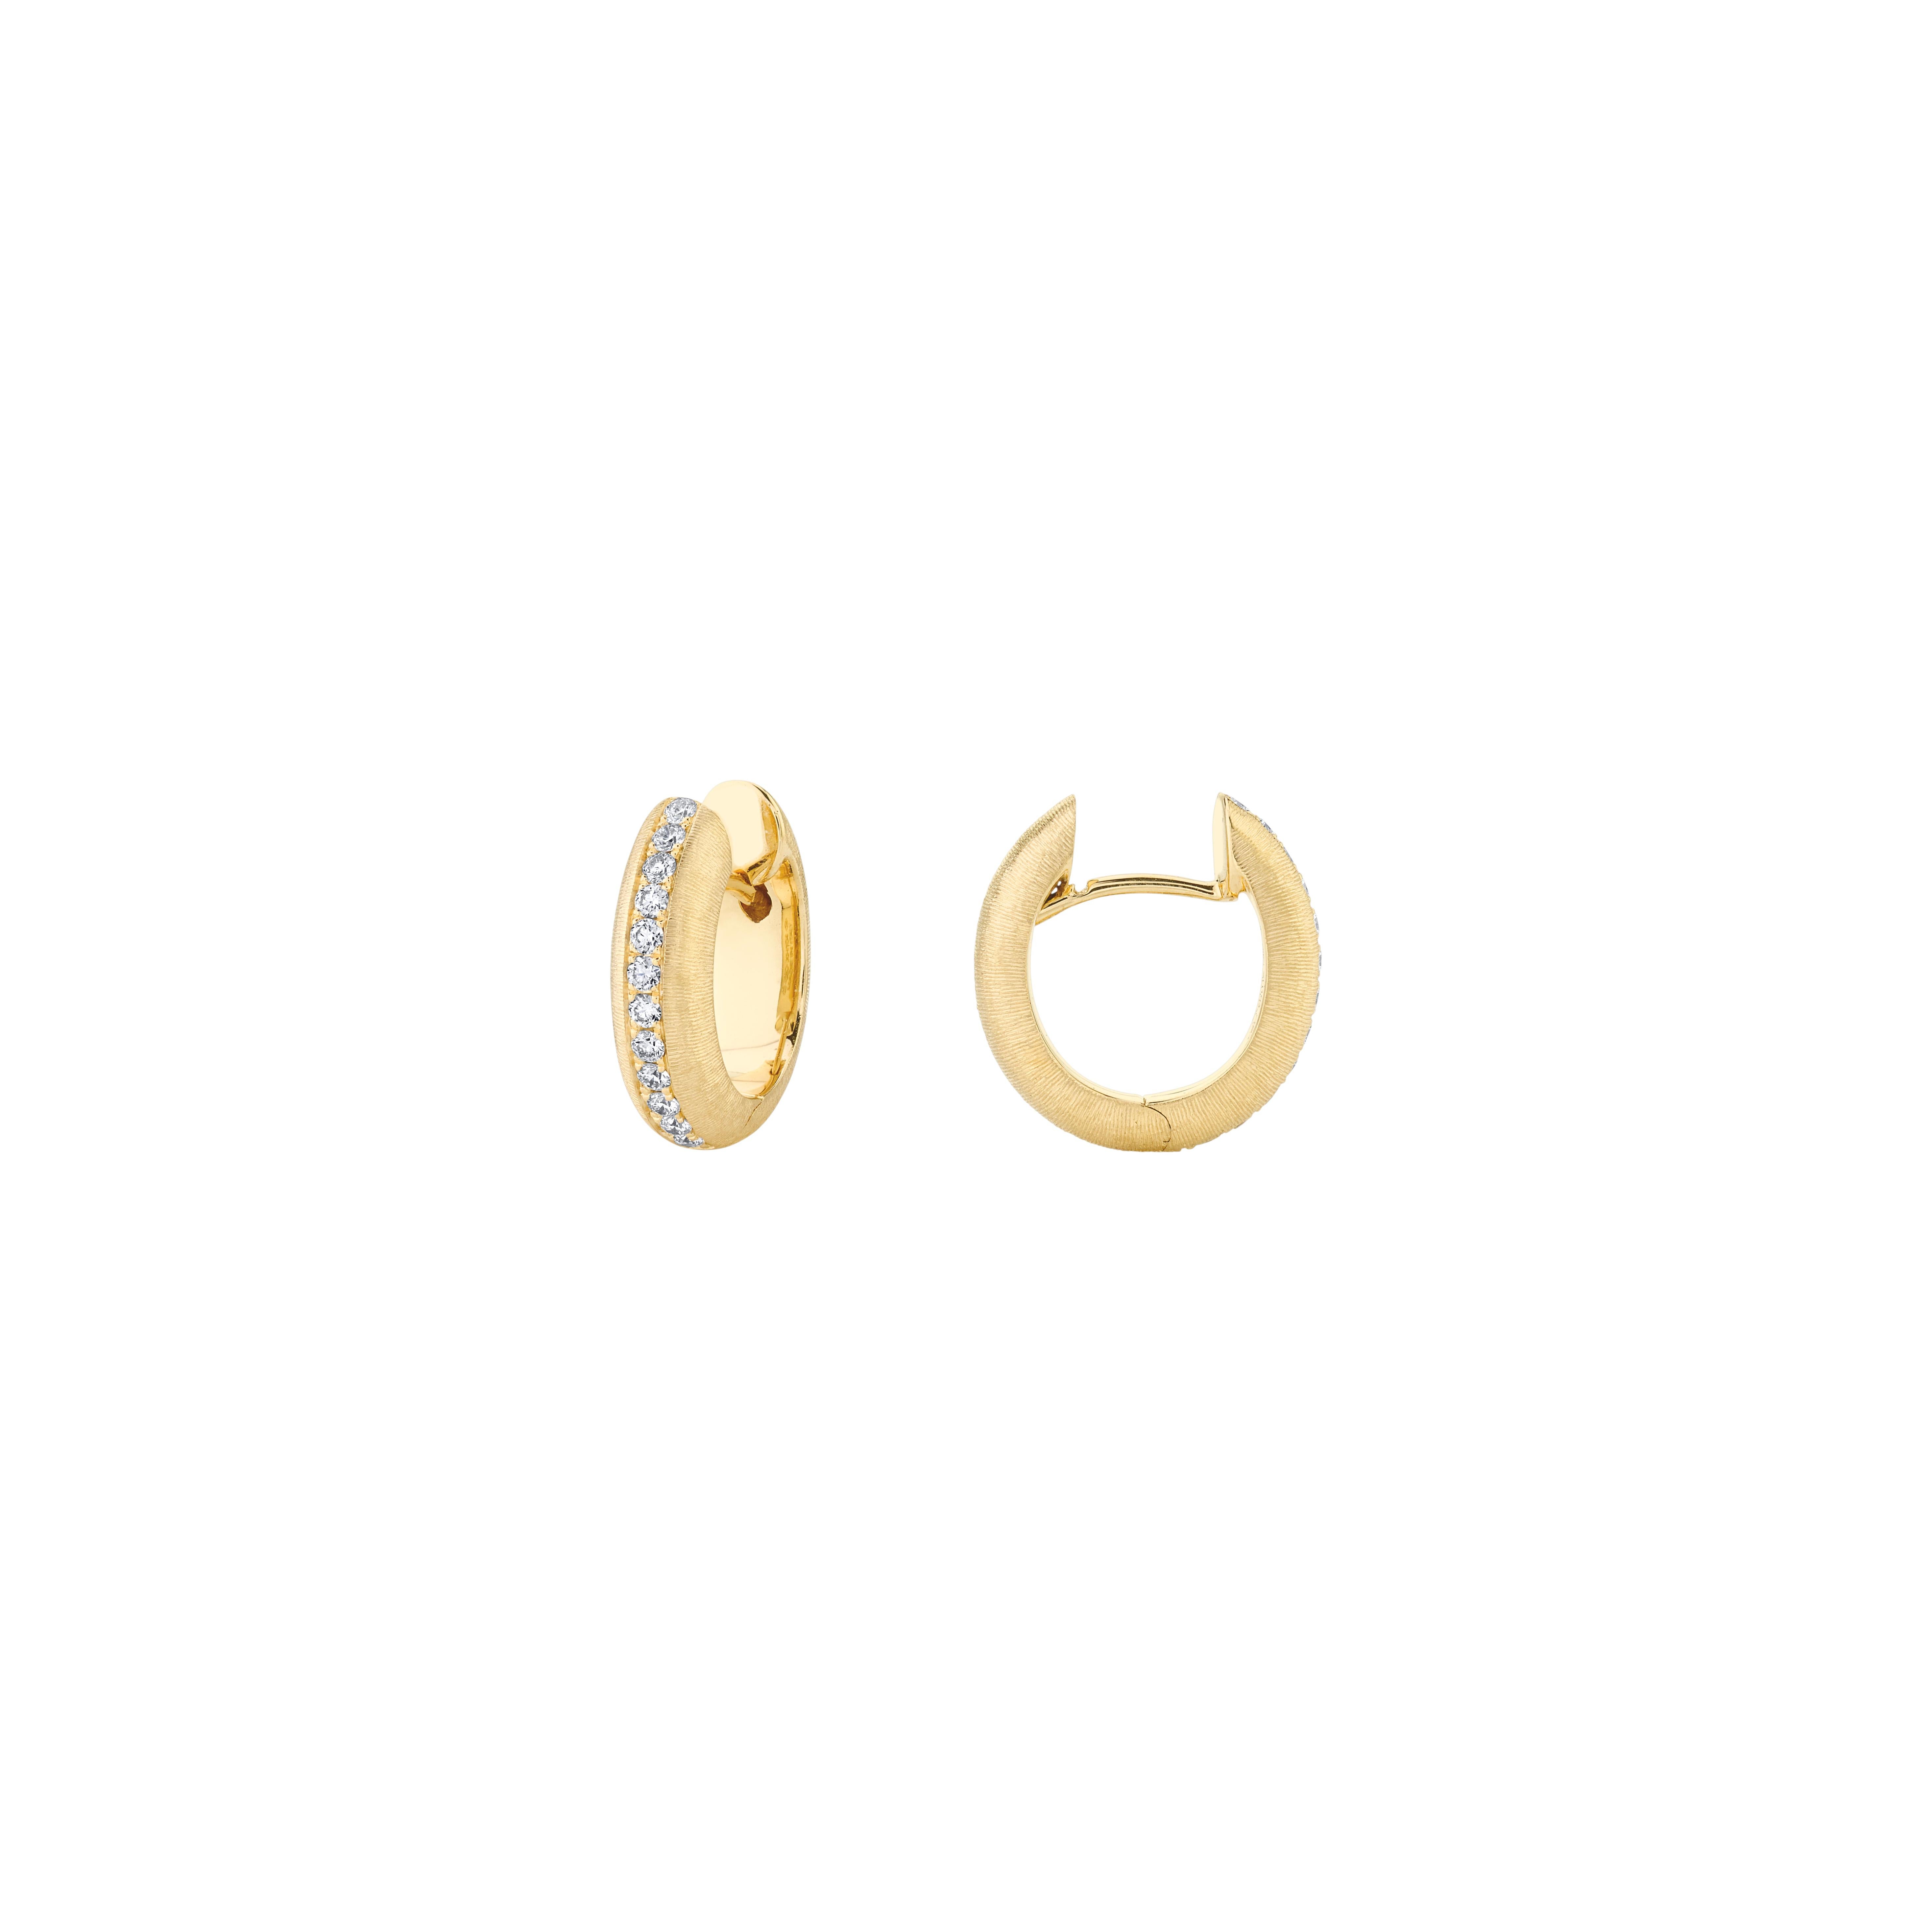 Style #: XH104E.
SYLVIA KONTENTE  18K Yellow gold diamond hoop earrings with hand-engraved finish.
Precision-cut, round brilliant diamonds.
Diamond total weight: 0.22ct tw.
Diamond color/clarity: DEF/VVS VS.
Hand-engraved finish - The ancient art of